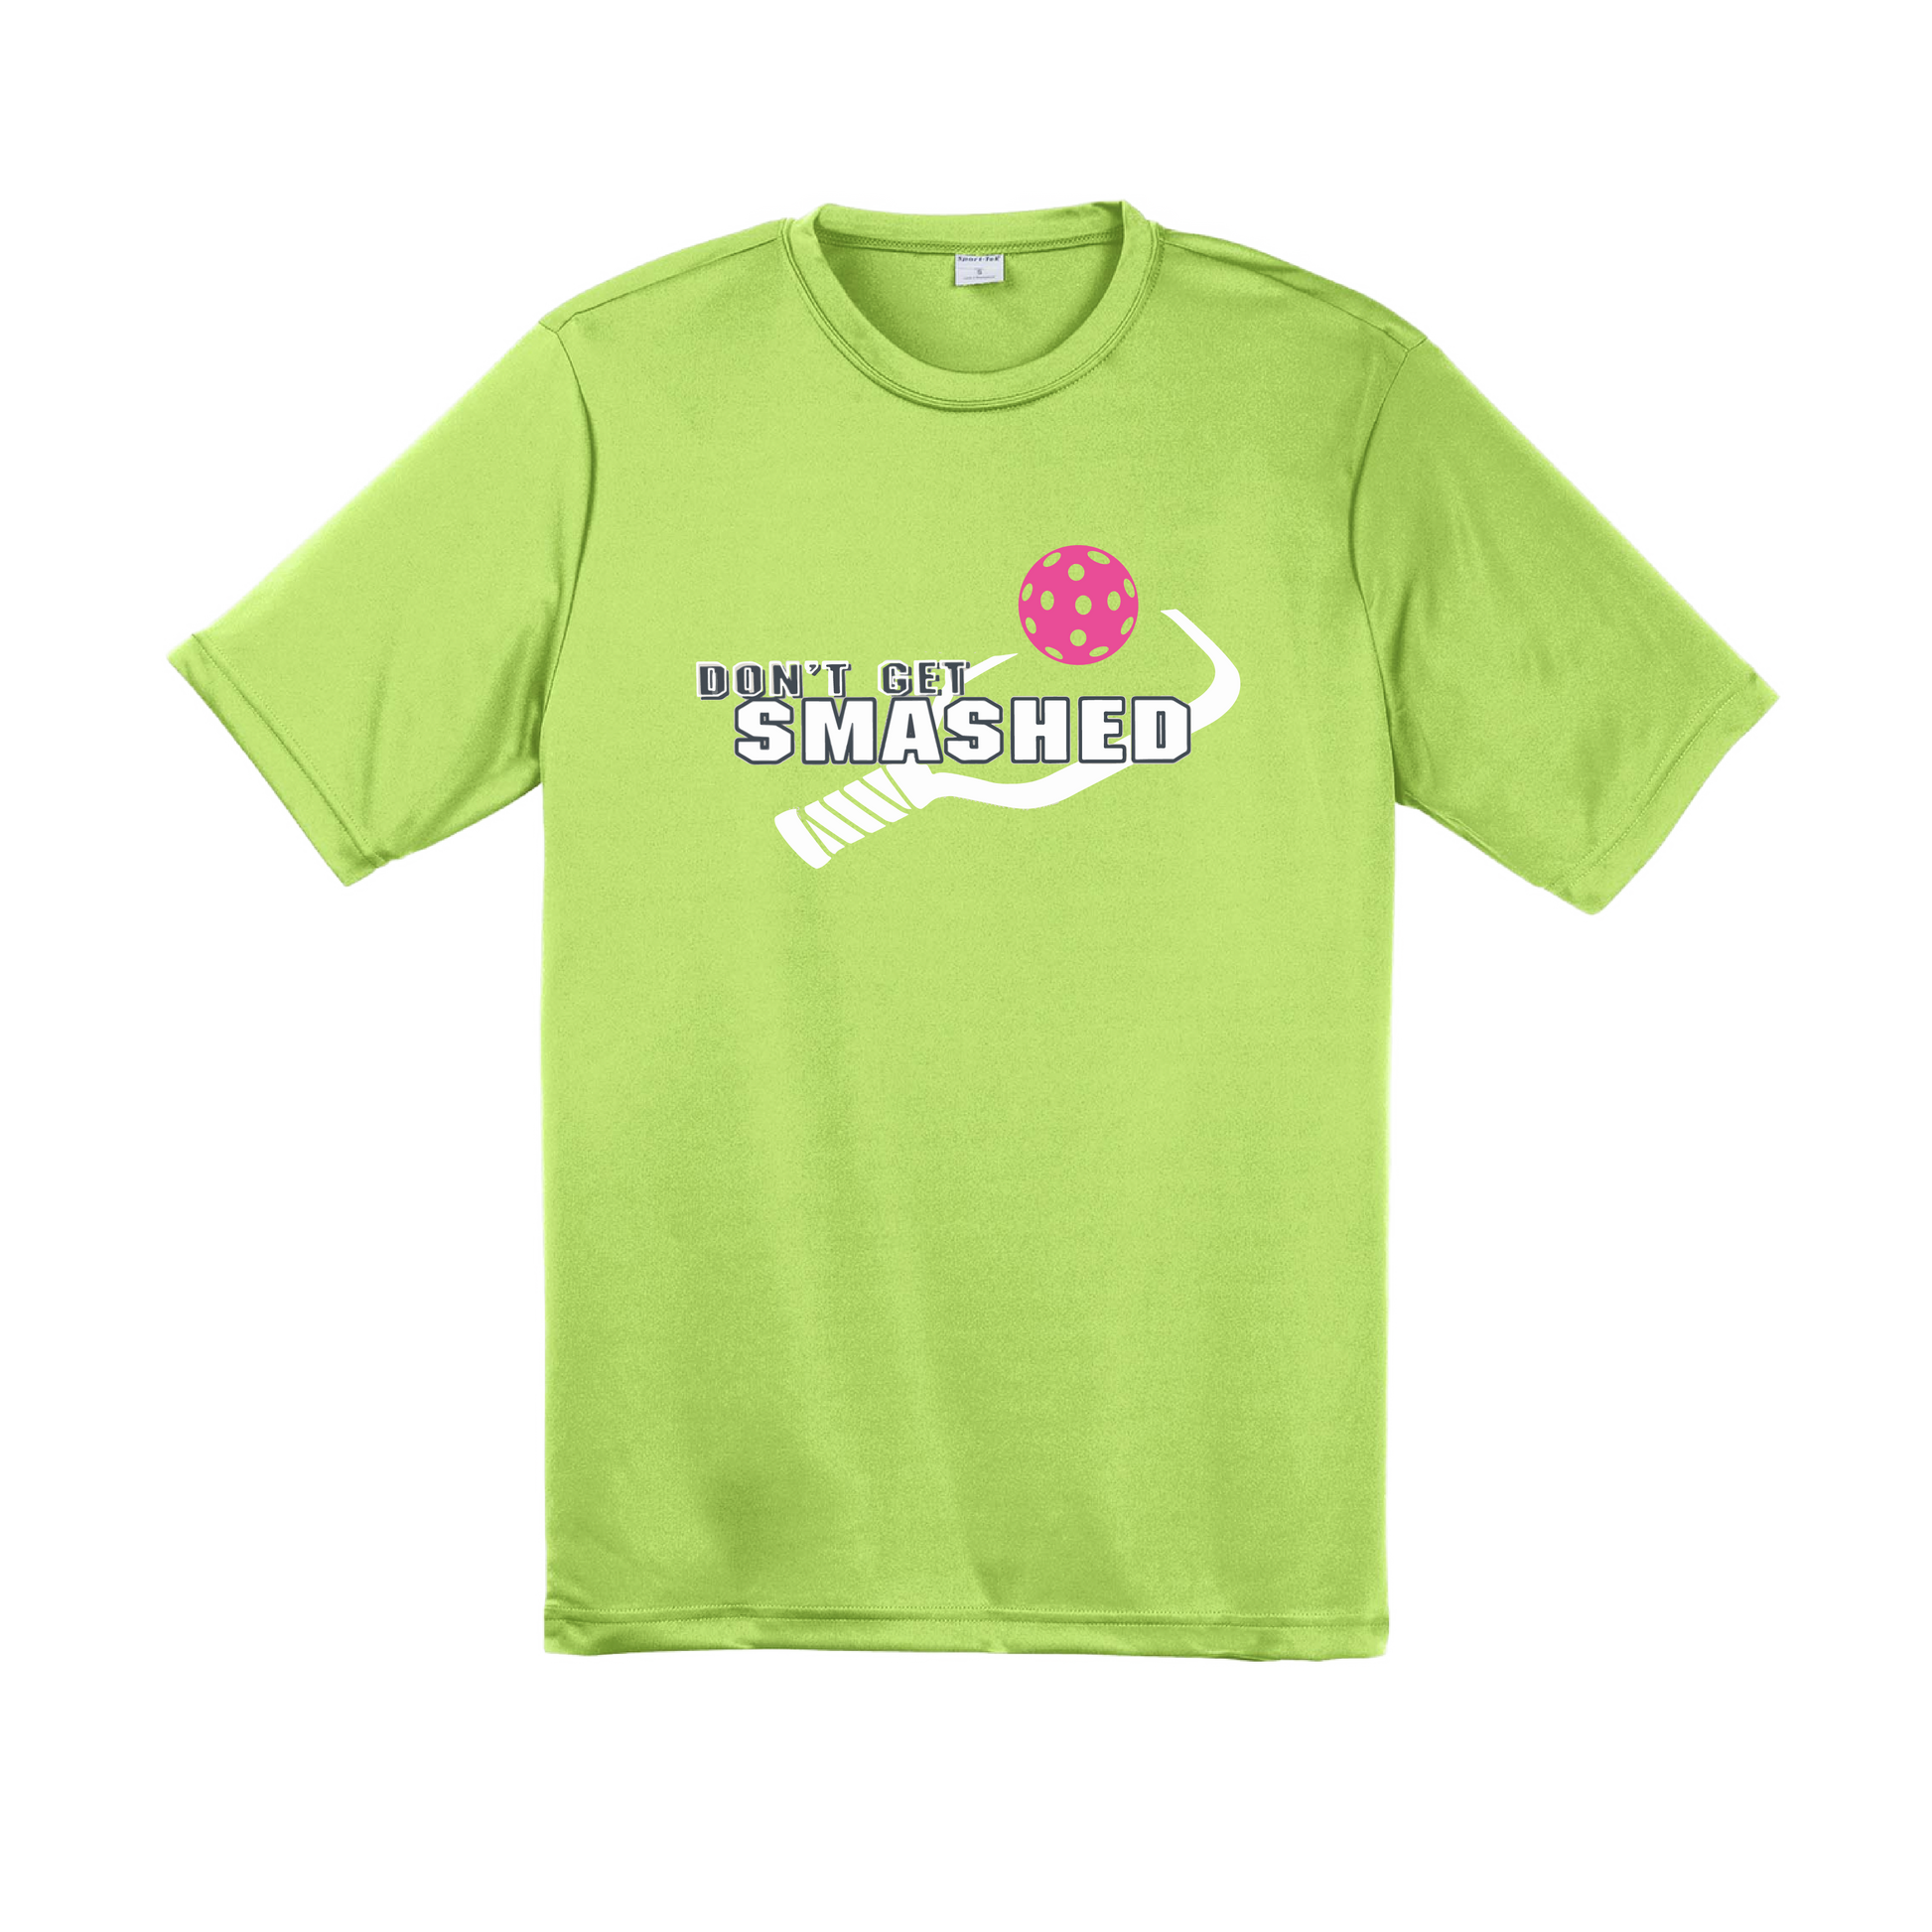 Our super-light and airy shirts keep you cool and dry for whatever sportin' pleasure you choose. We've added PosiCharge to make sure our colors stay vibrant and logos can't get faded. So comfy, you'll forget you're wearing it. Plus, no tags needed.